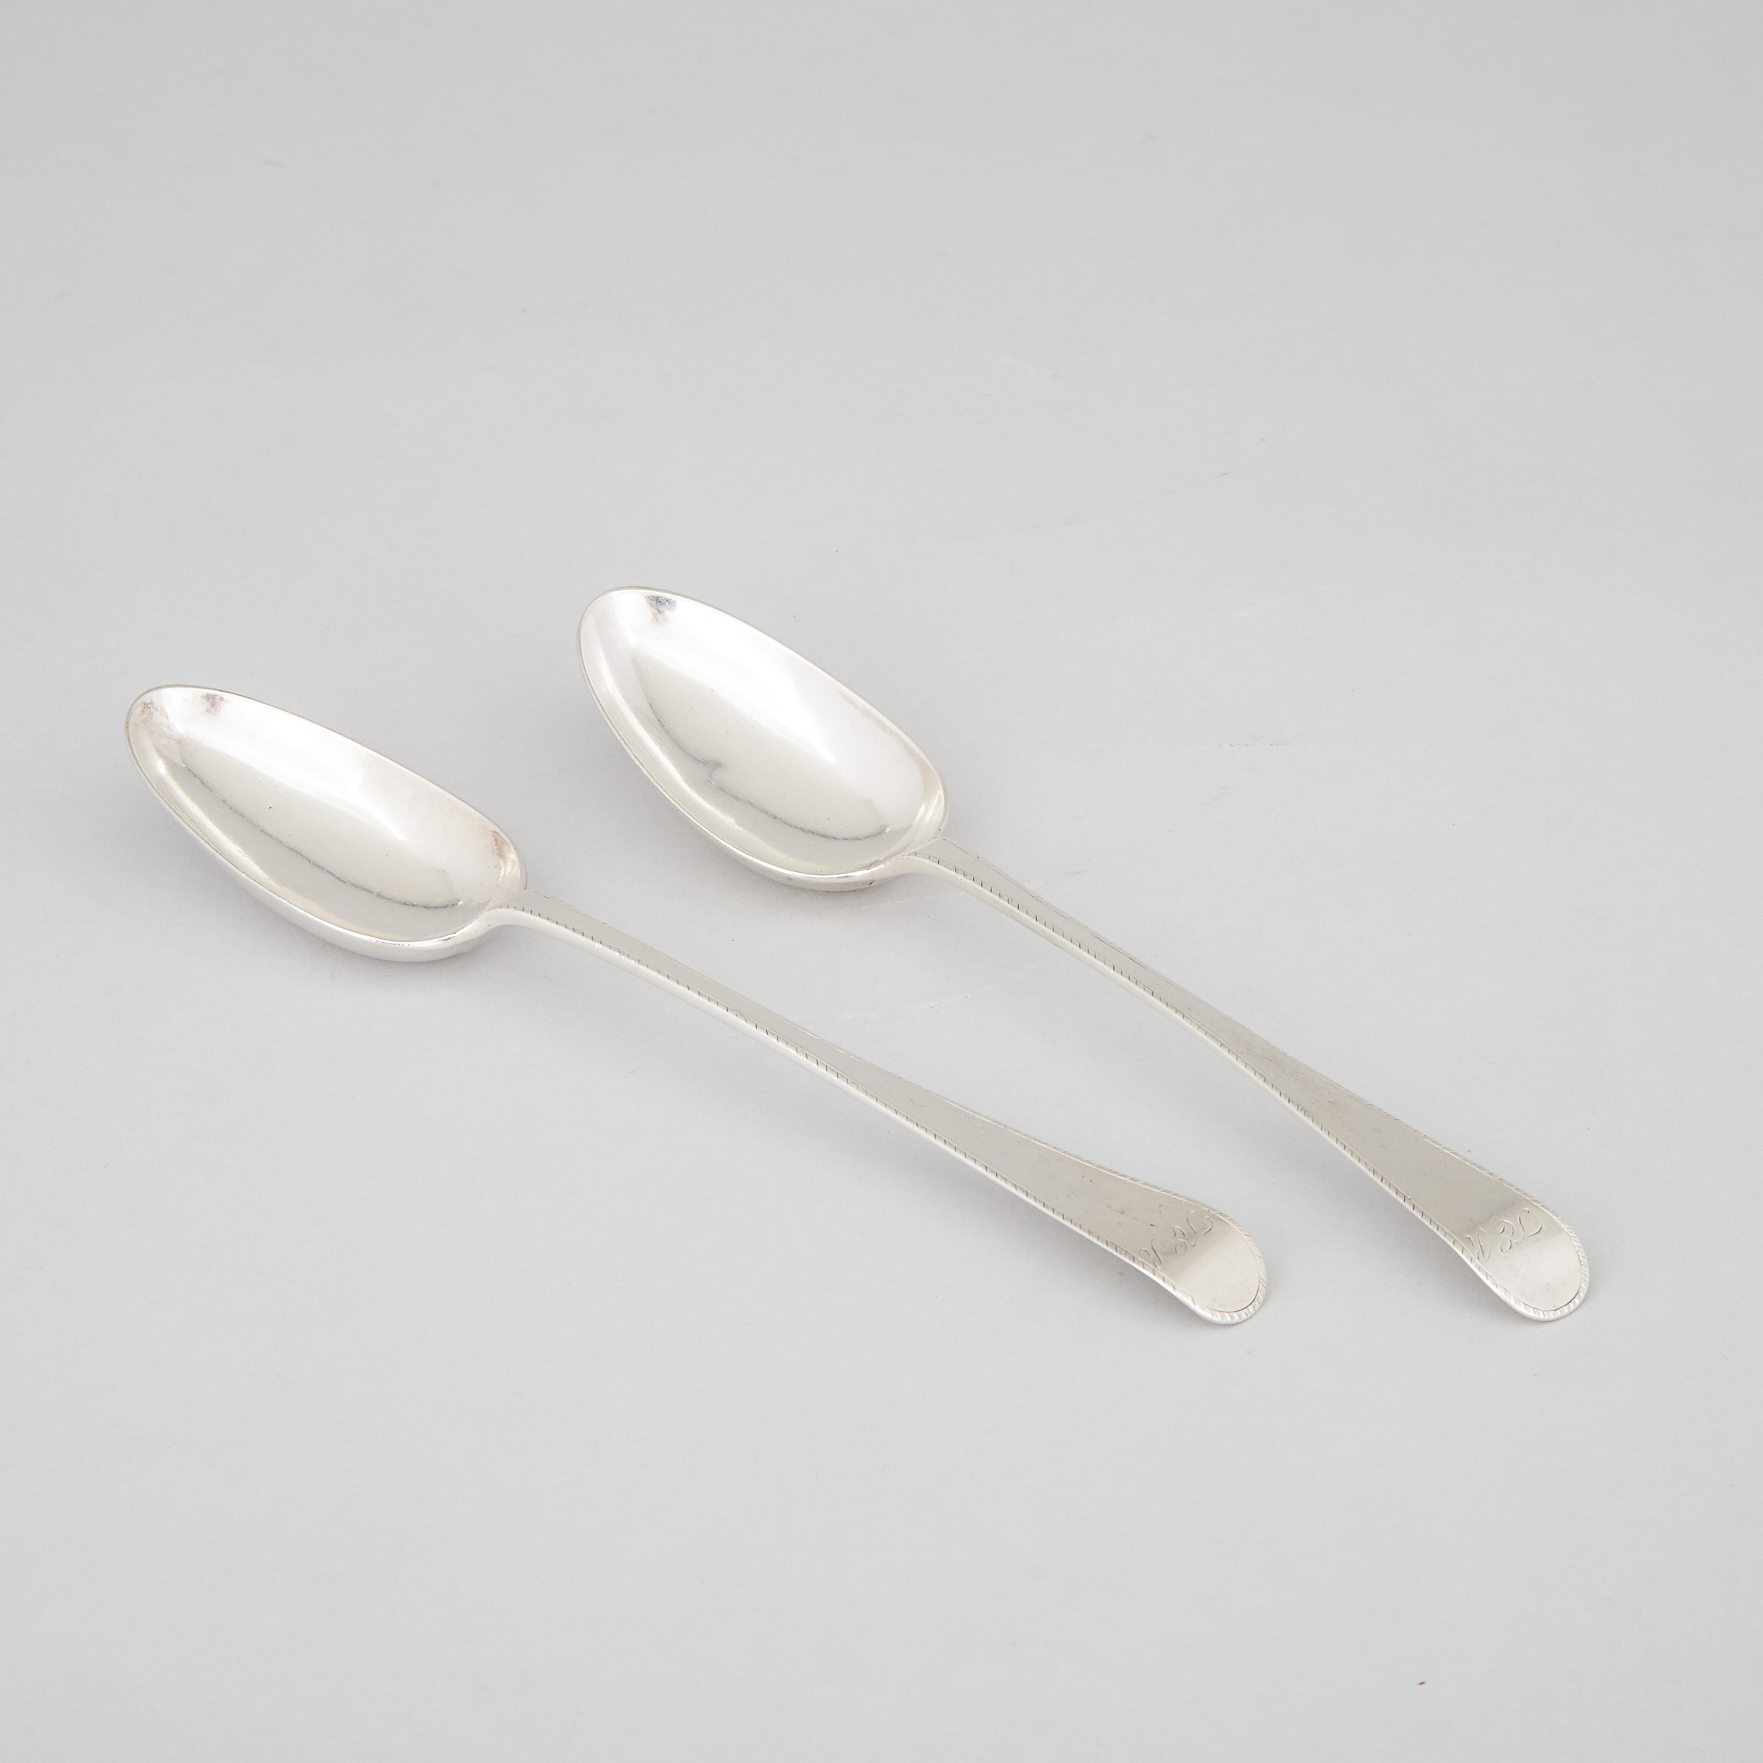 Pair of American Silver Feather-Edged Old English Pattern Table Spoons, Thomas You, Charleston, S.C., c.1775